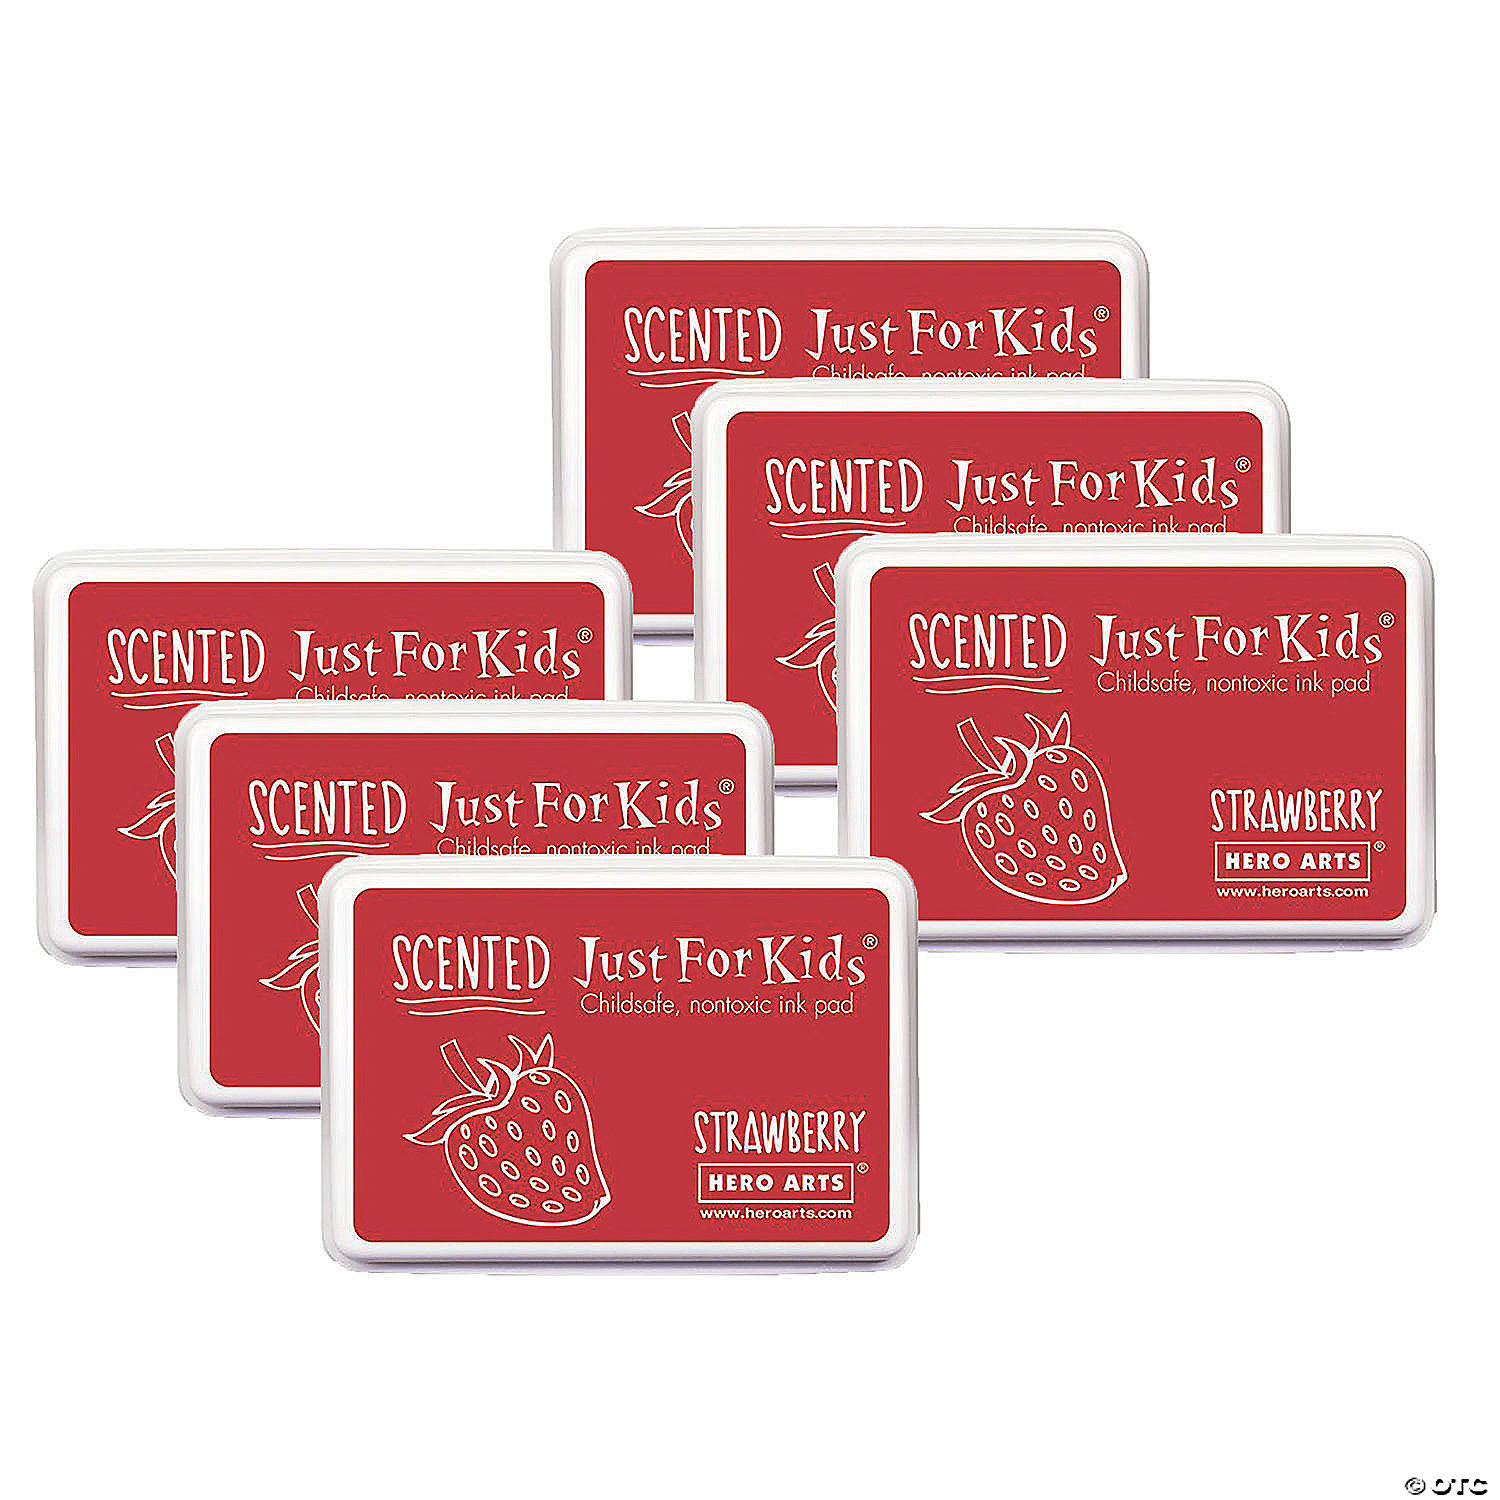 Washable Stamp Pad - Strawberry Scent, Red - Pack of 6